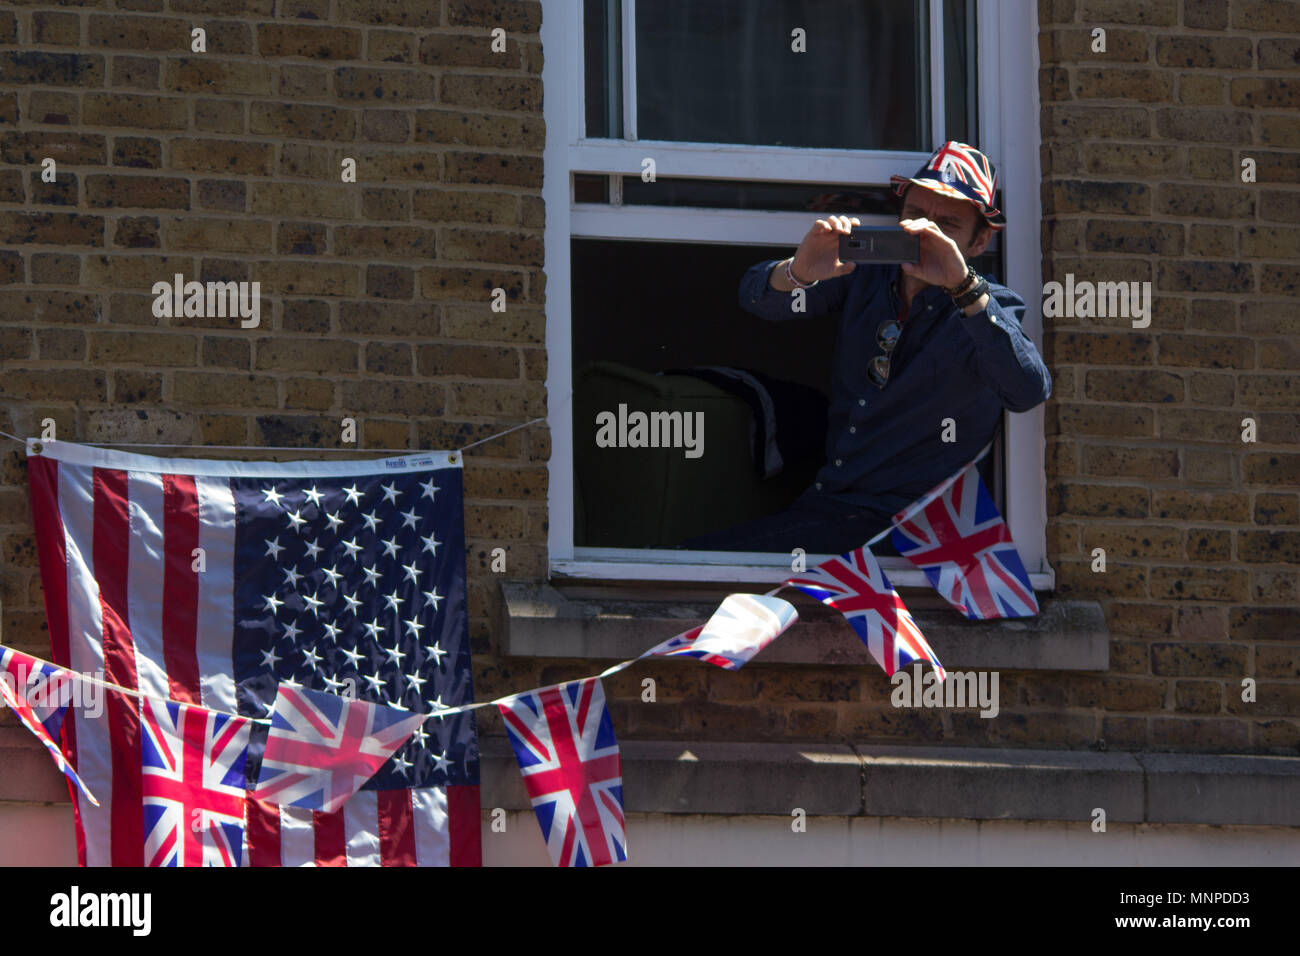 Windsor, Bershire, UK. 19th May, 2018. An onlooker prepares to snap a shot during the wedding procession of Prince Harry and Meghan Markle. Credit: Michael Candelori/ZUMA Wire/Alamy Live News Stock Photo